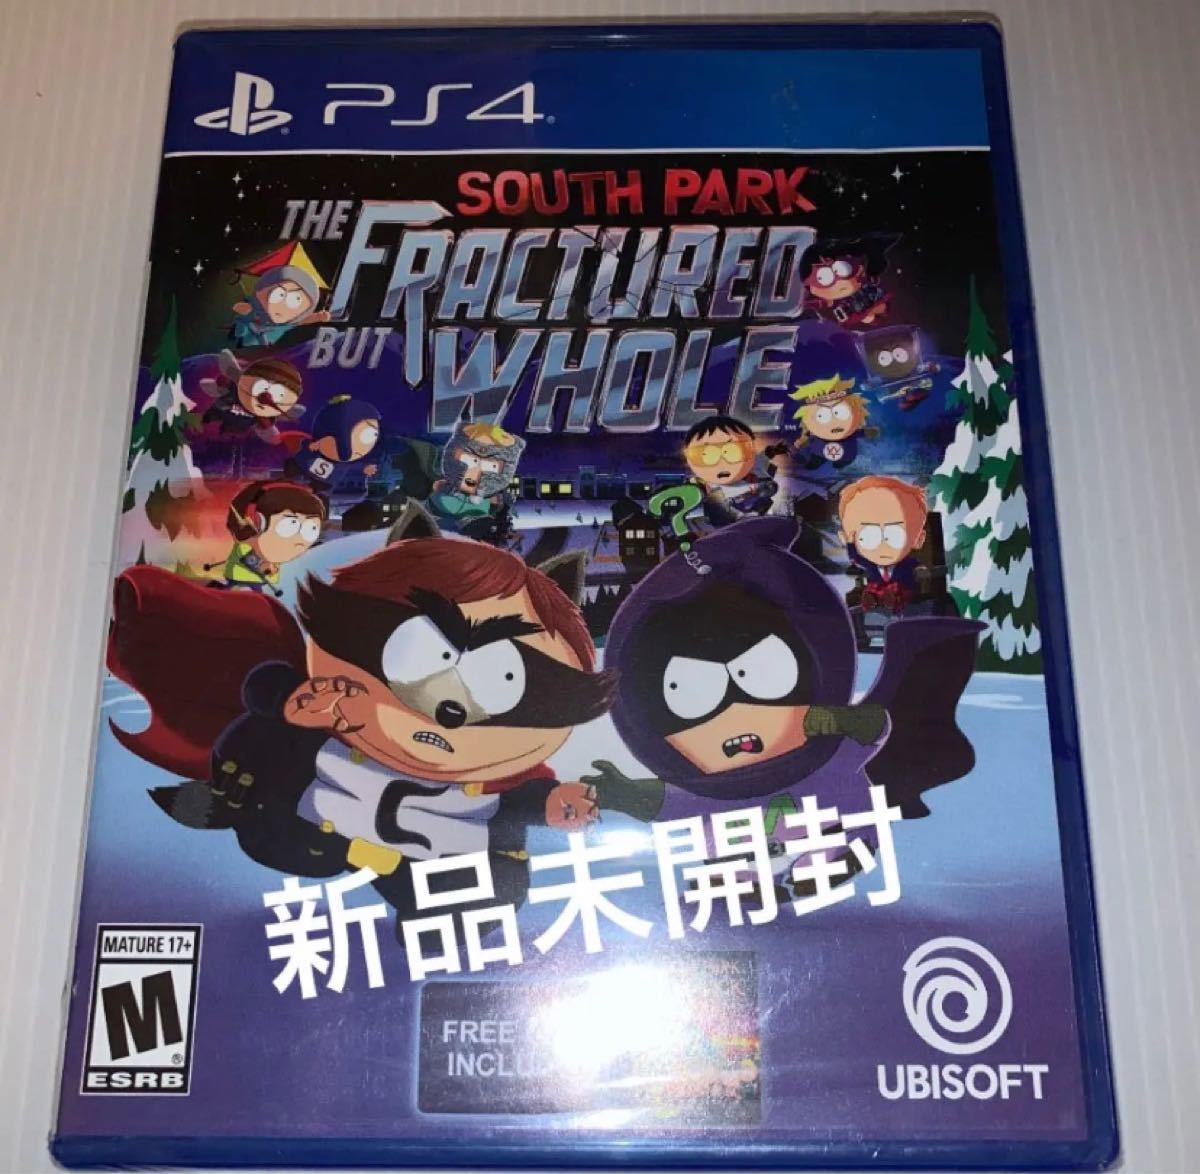 South Park: The Fractured but Whole ps4